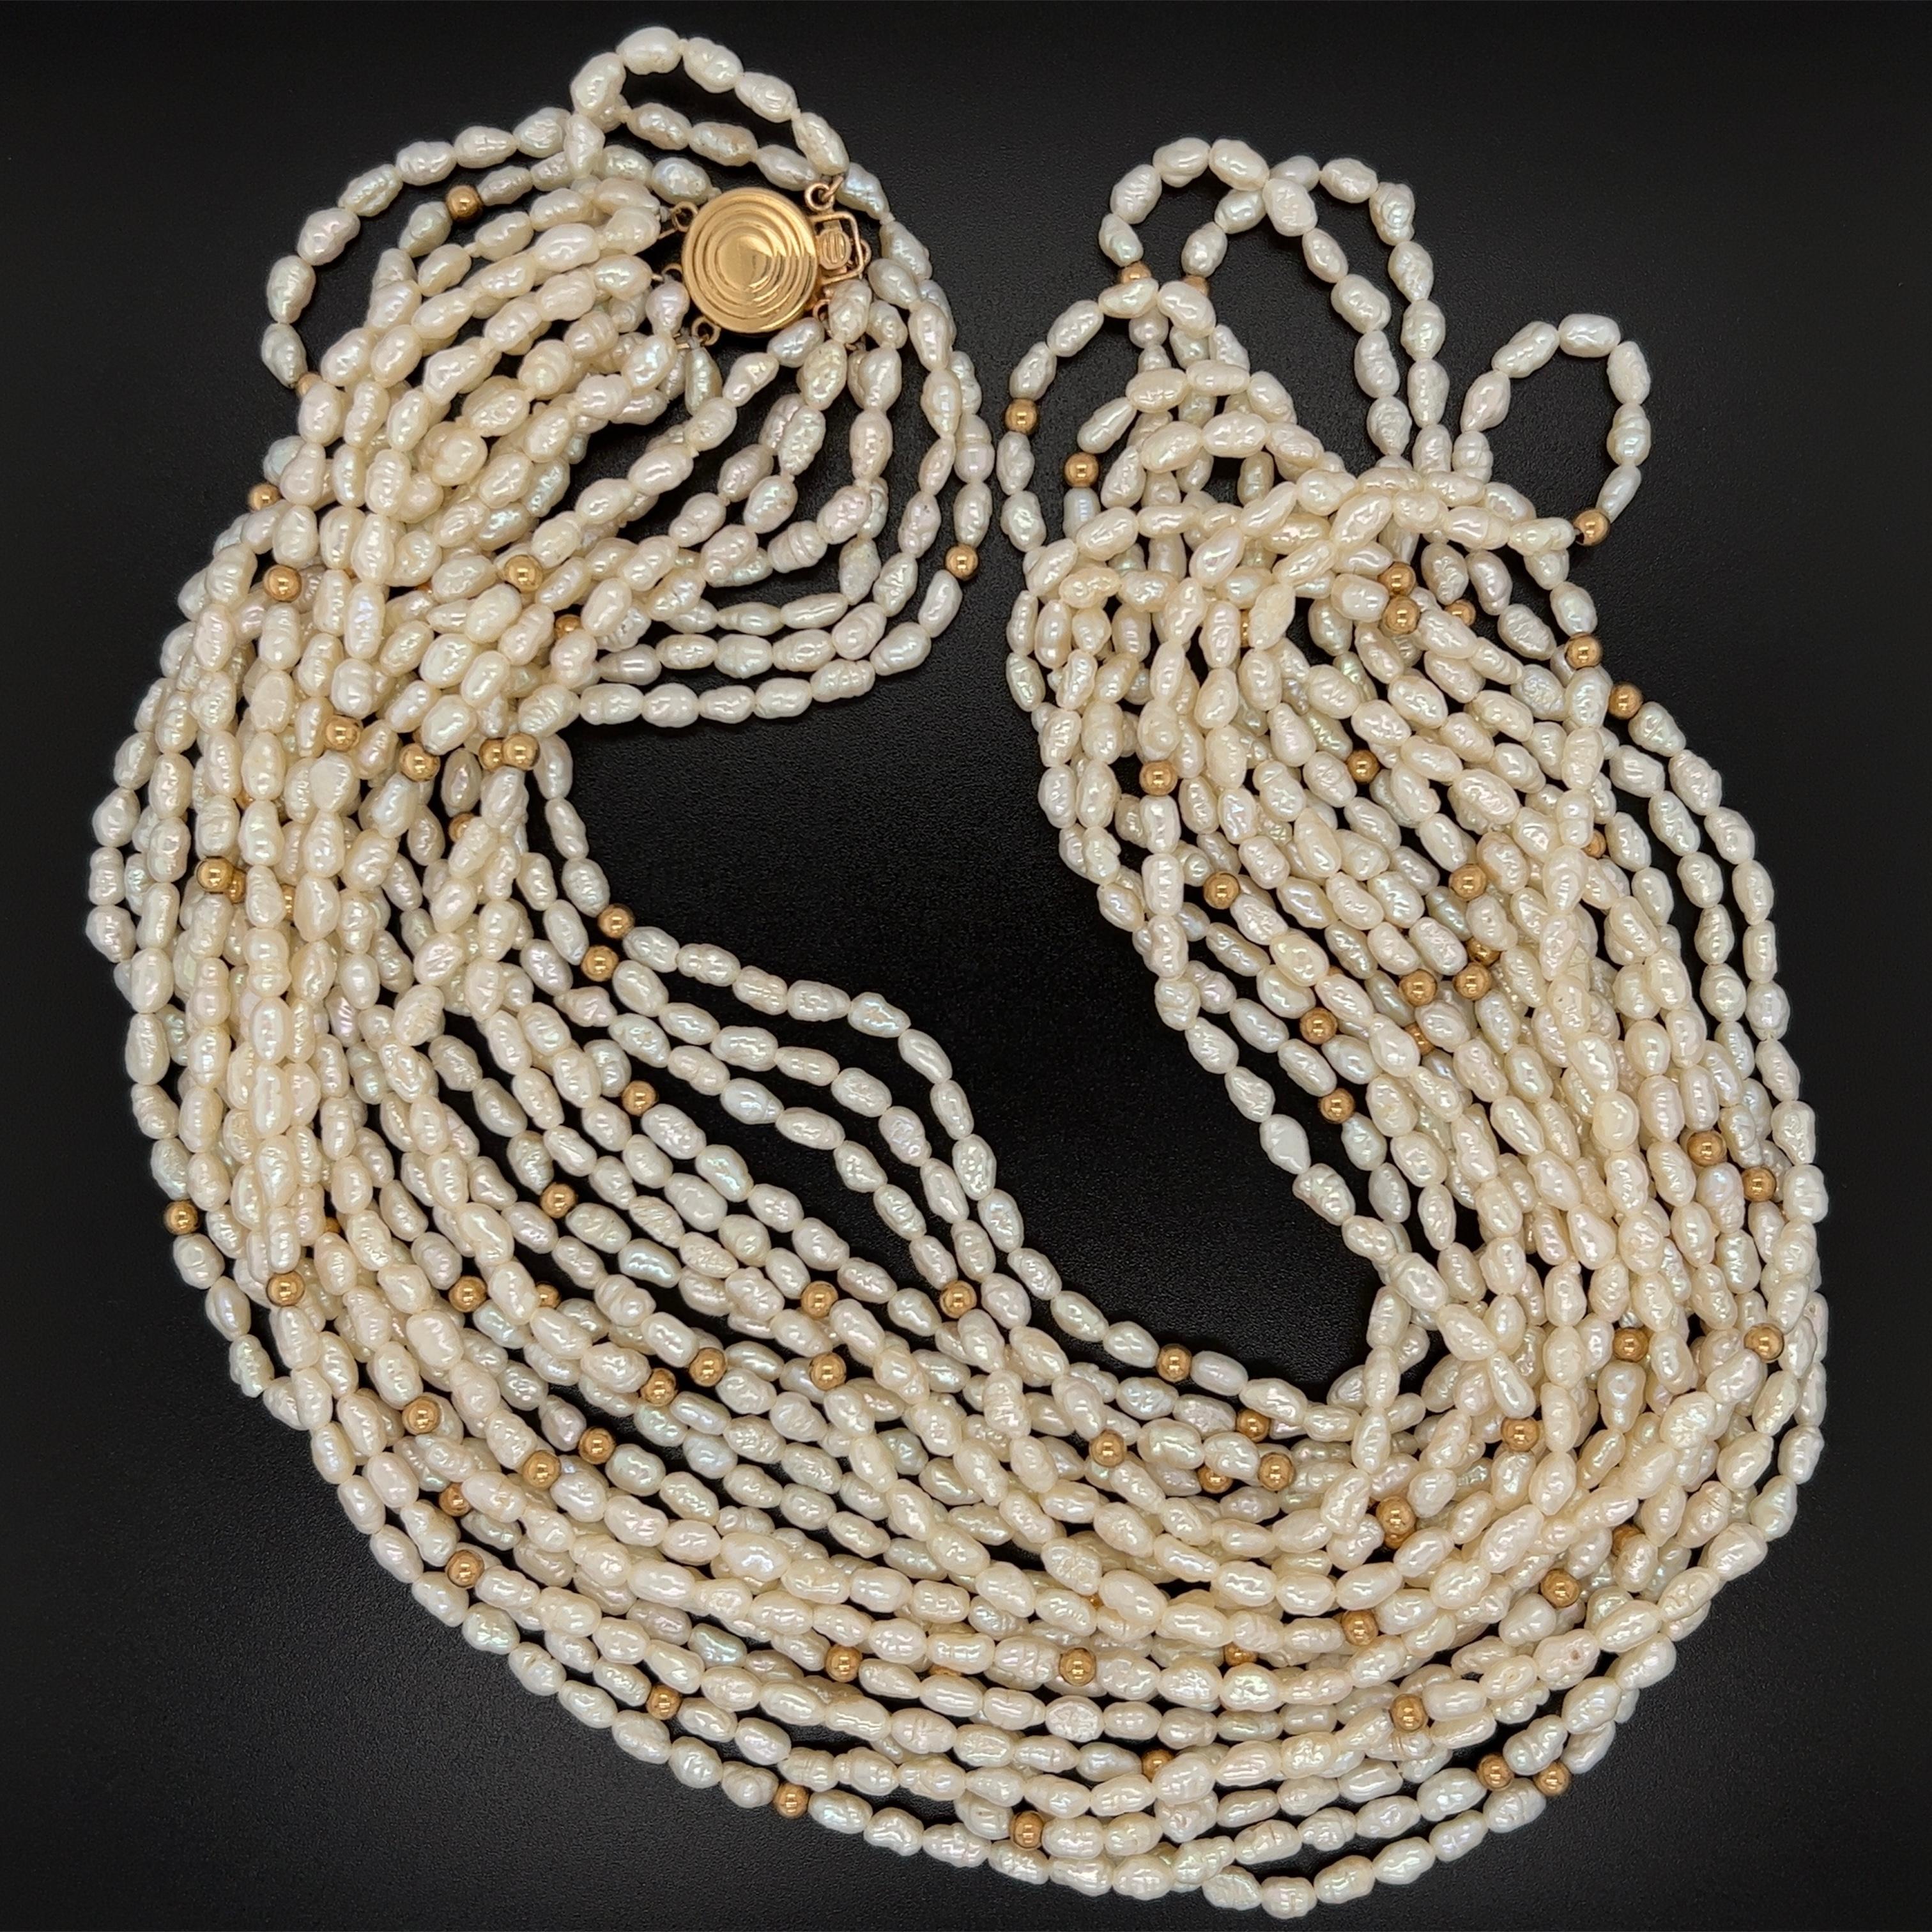 Simply Beautiful! Fine Baroque Pearl 10 Strand and Gold Bead Necklace held by a 14K Yellow Gold circular clasp. Approx. length of necklace: 23”. More Beautiful in real time! Unique and fabulous as you are! A piece you’ll turn to time and time again!
